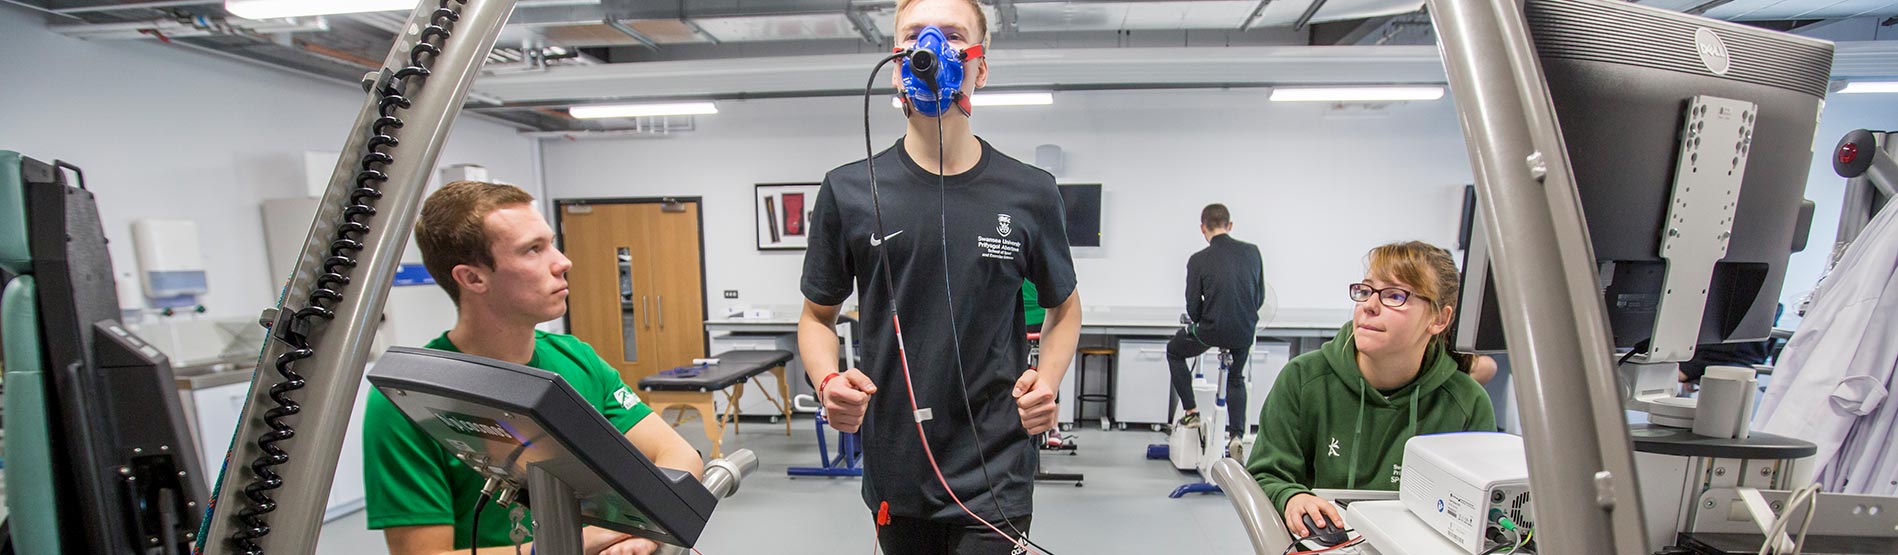 Sports Science Degree, BSc Sports and Exercise Science